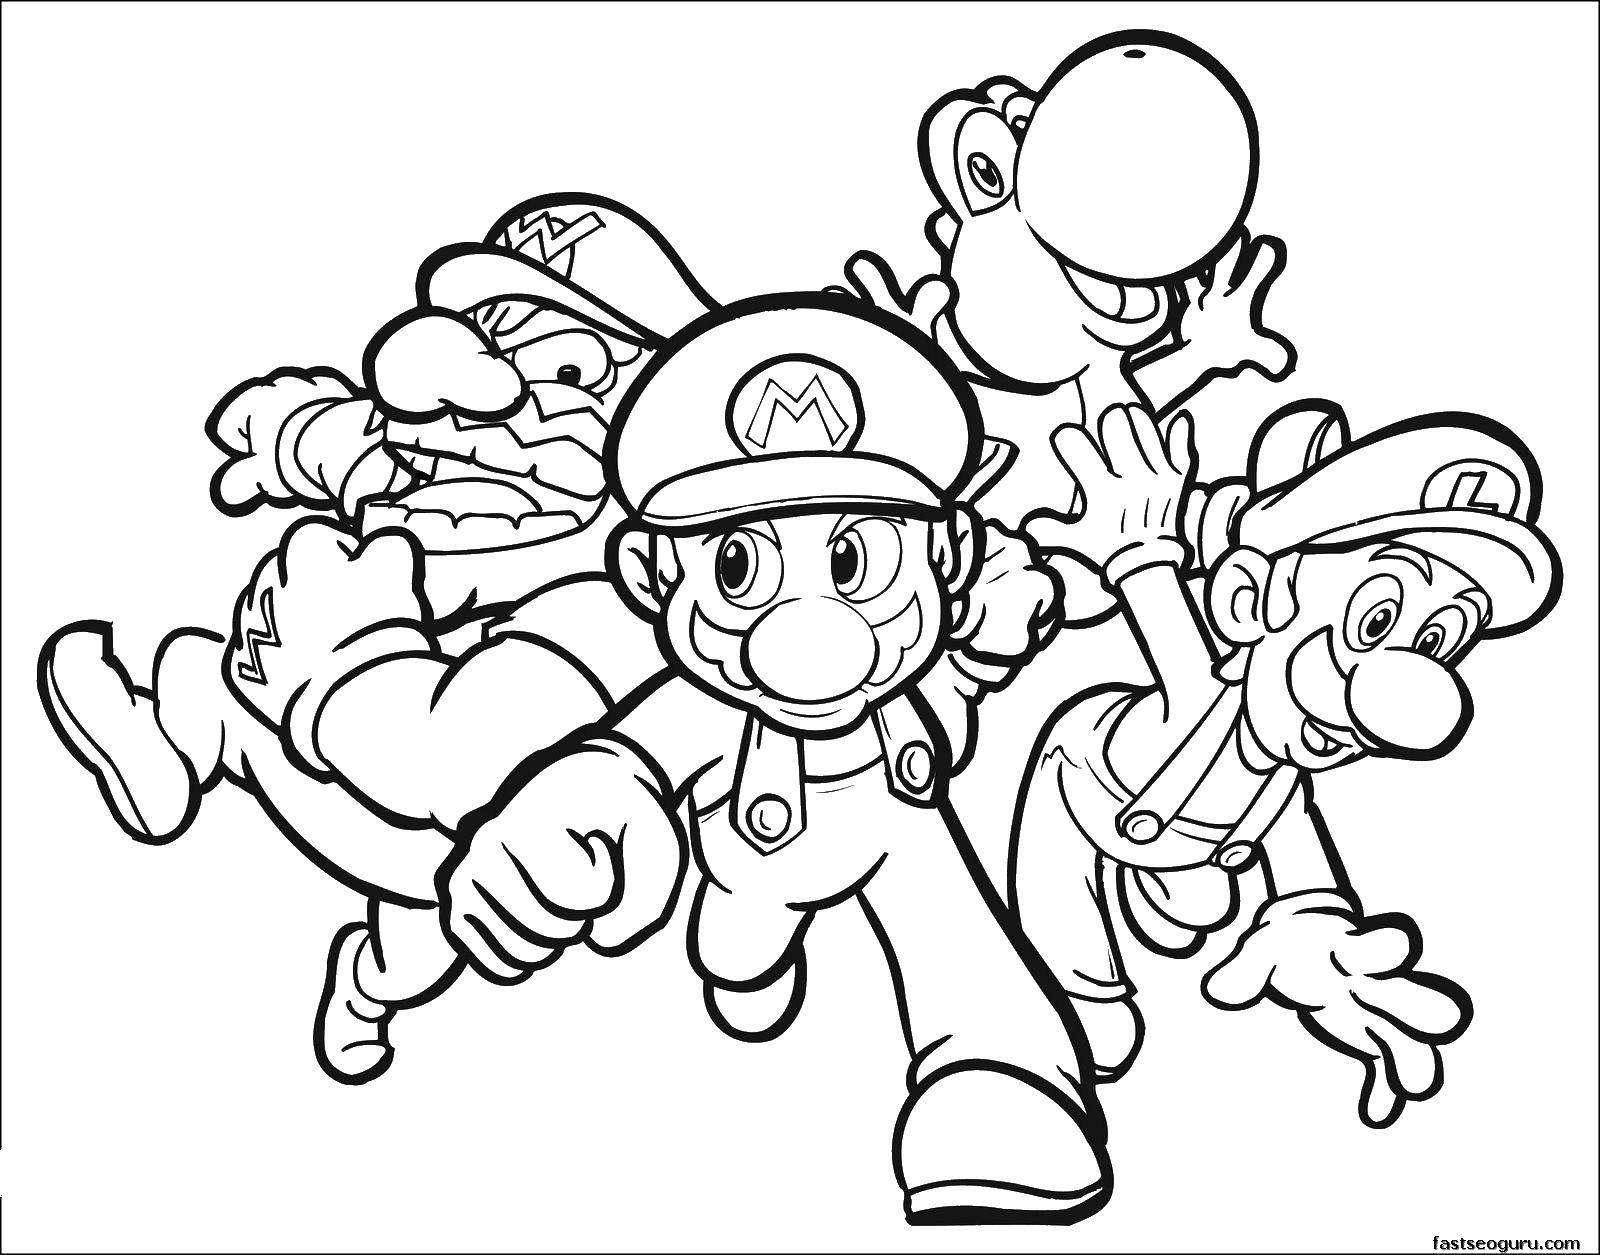 Coloring Super Mario, Luigi and wario. Category The character from the game. Tags:  Games, Mario.